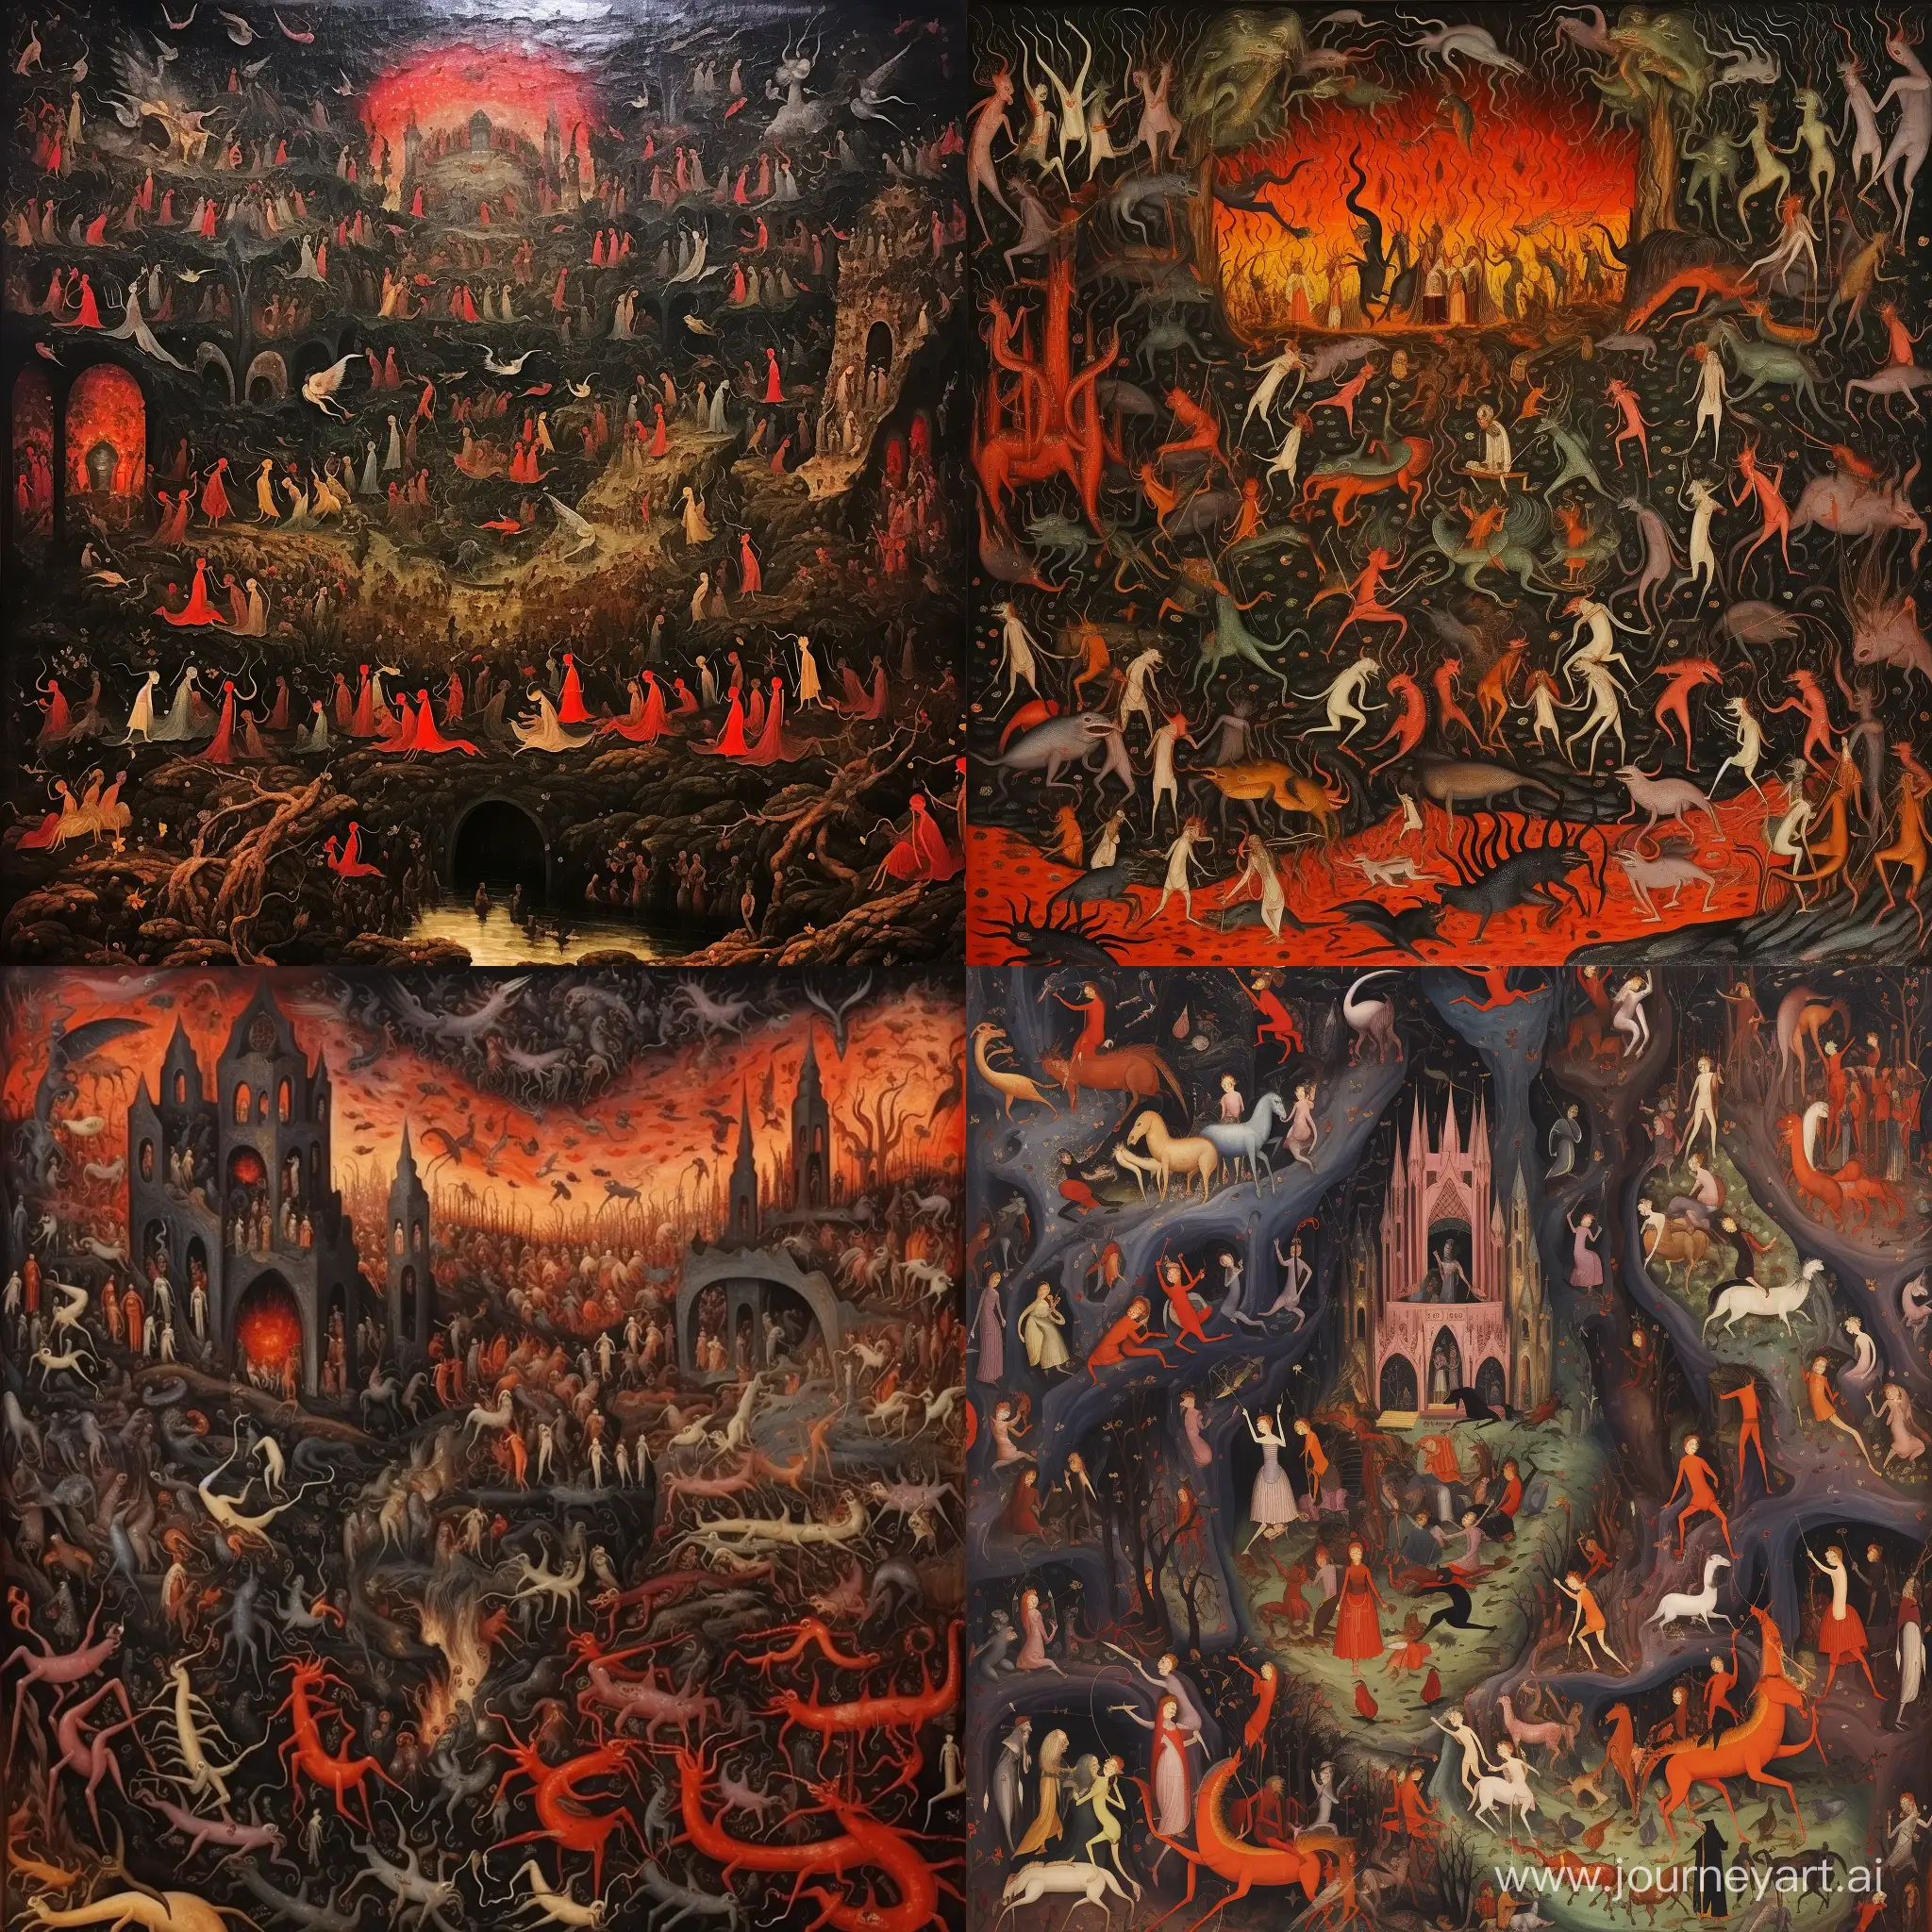 Iranian-Style-Persian-Miniature-Painting-of-Hell